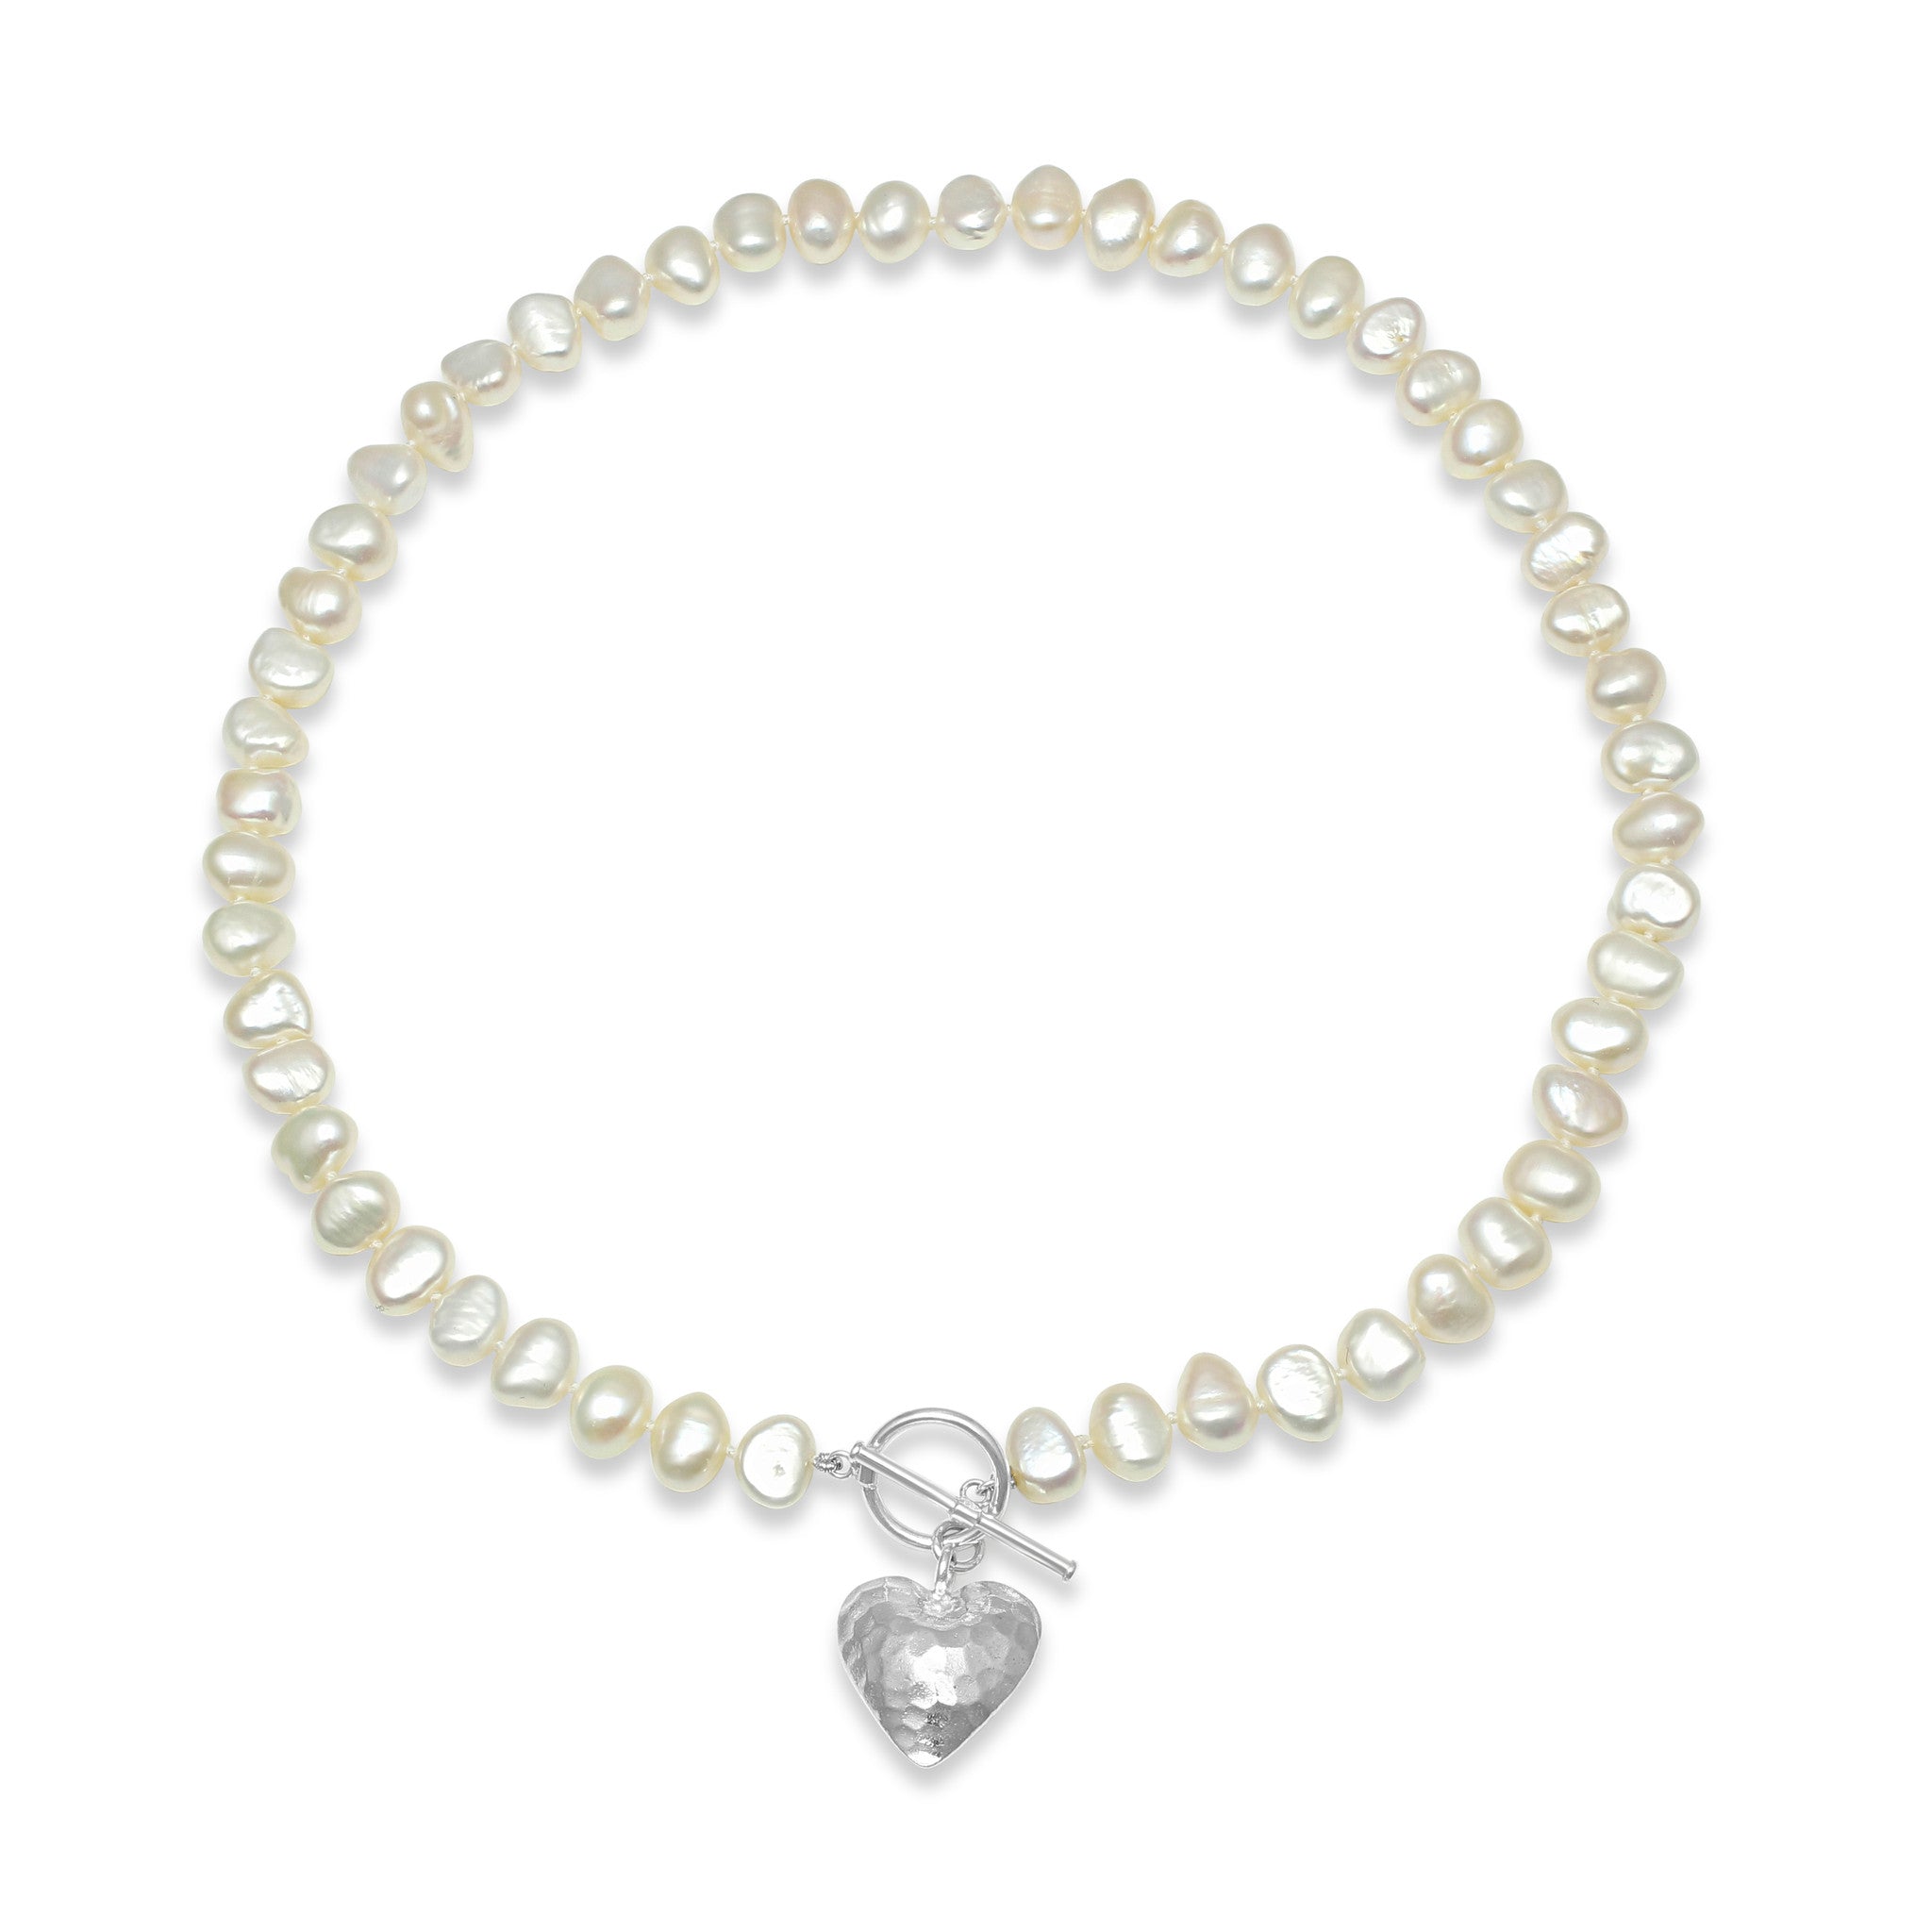 Women’s White / Silver Amare Single Strand White Irregular Cultured Freshwater Pearl Necklace With Silver Hammered Heart Pearls of the Orient Online